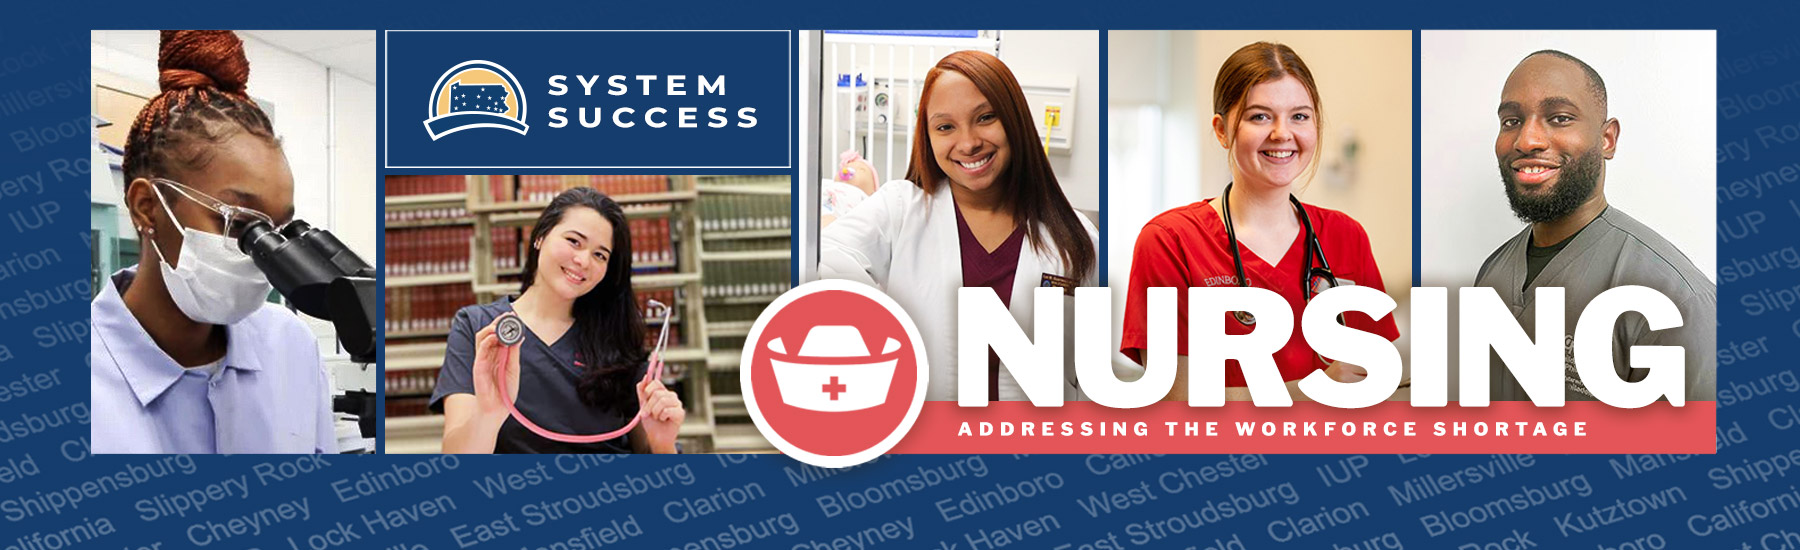 System Success Nursing | PA State System of Higher Education